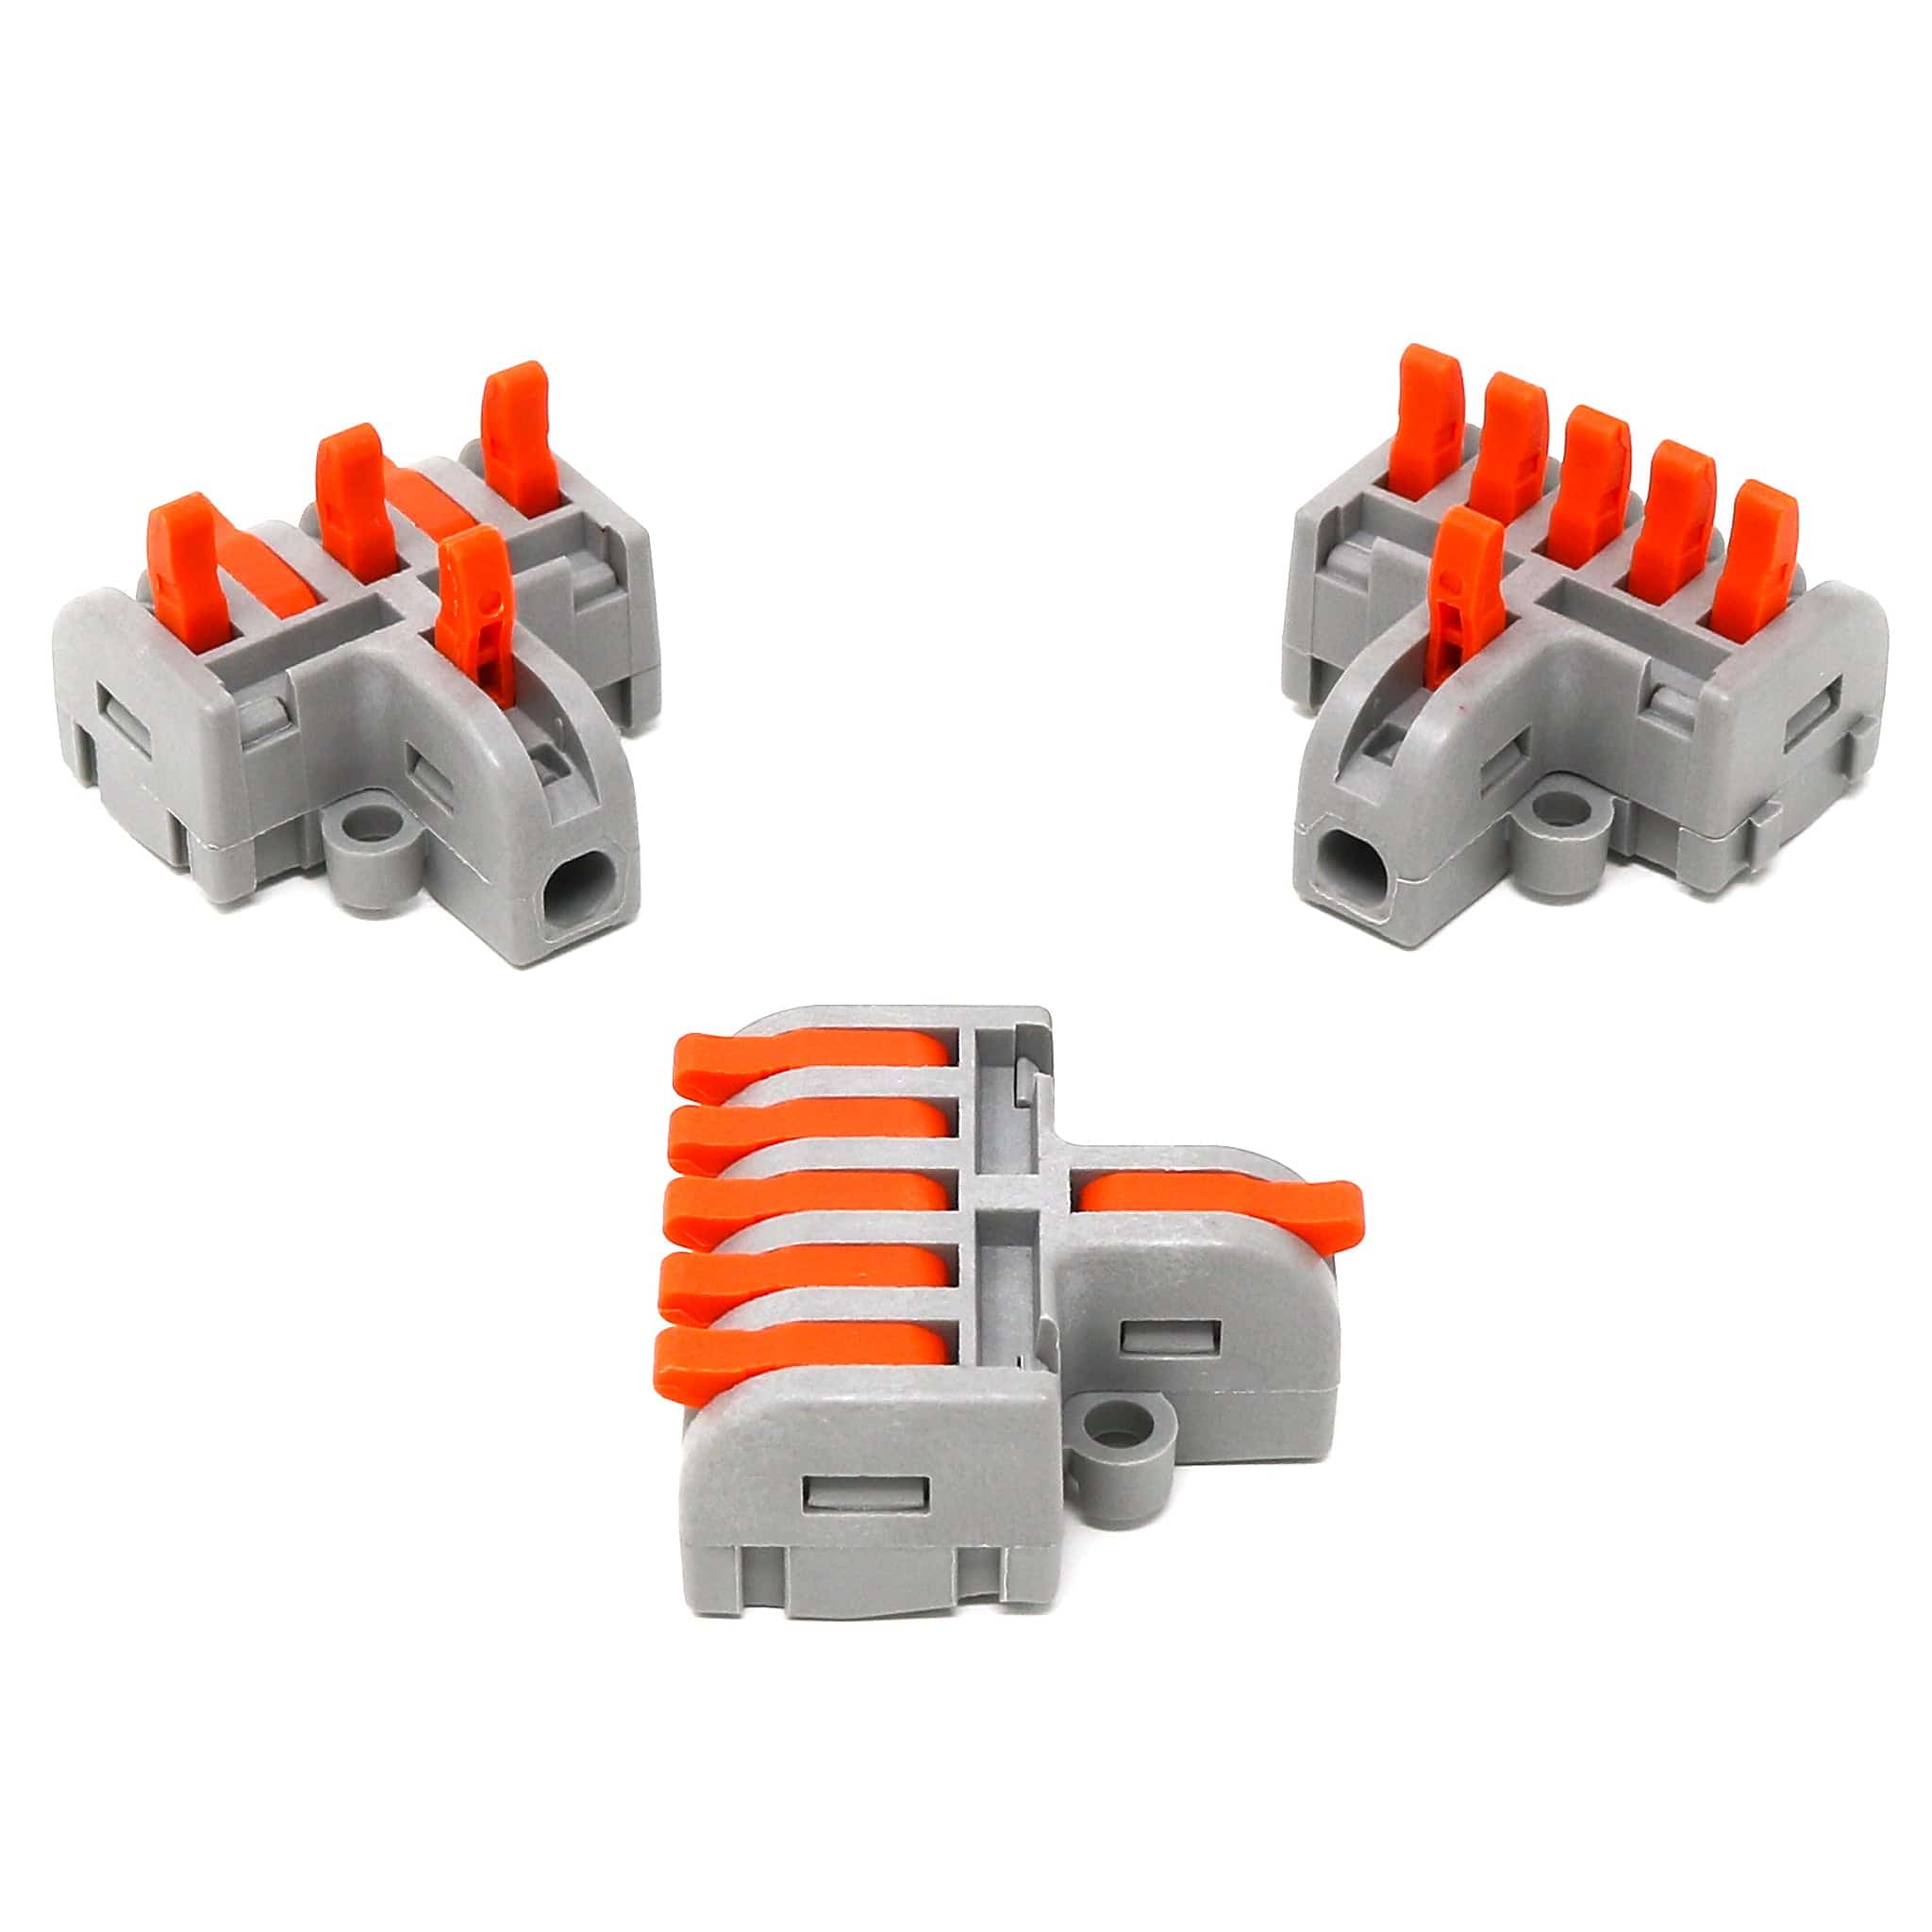 5-Way Fast Wire Splitters - Pack of 3 - The Pi Hut